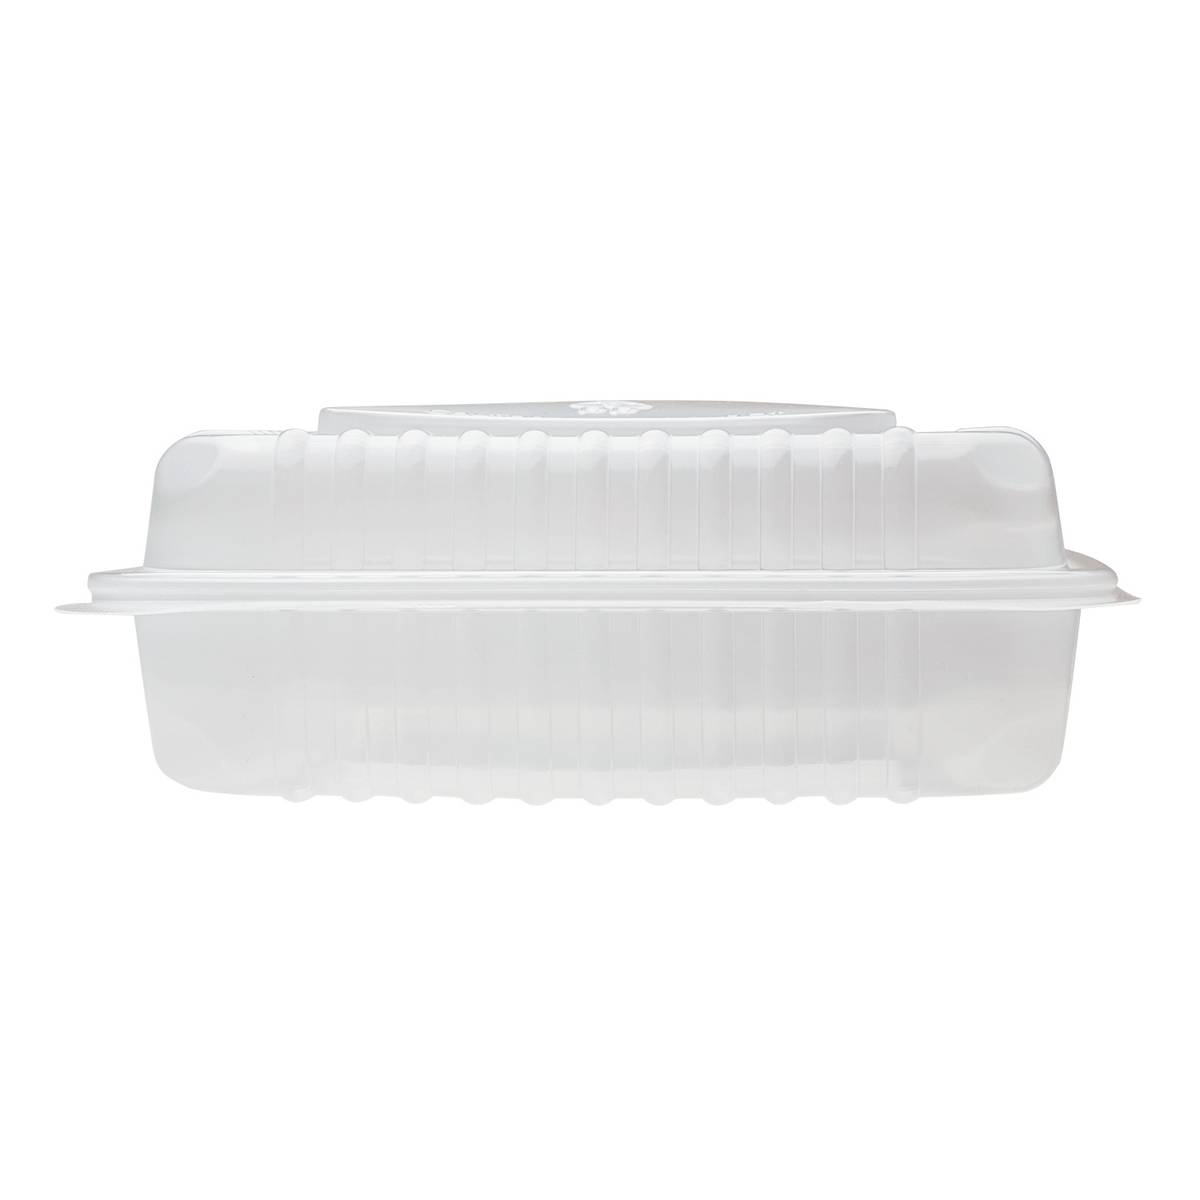 Disposable takeout plastic handle food paper container with dish tray